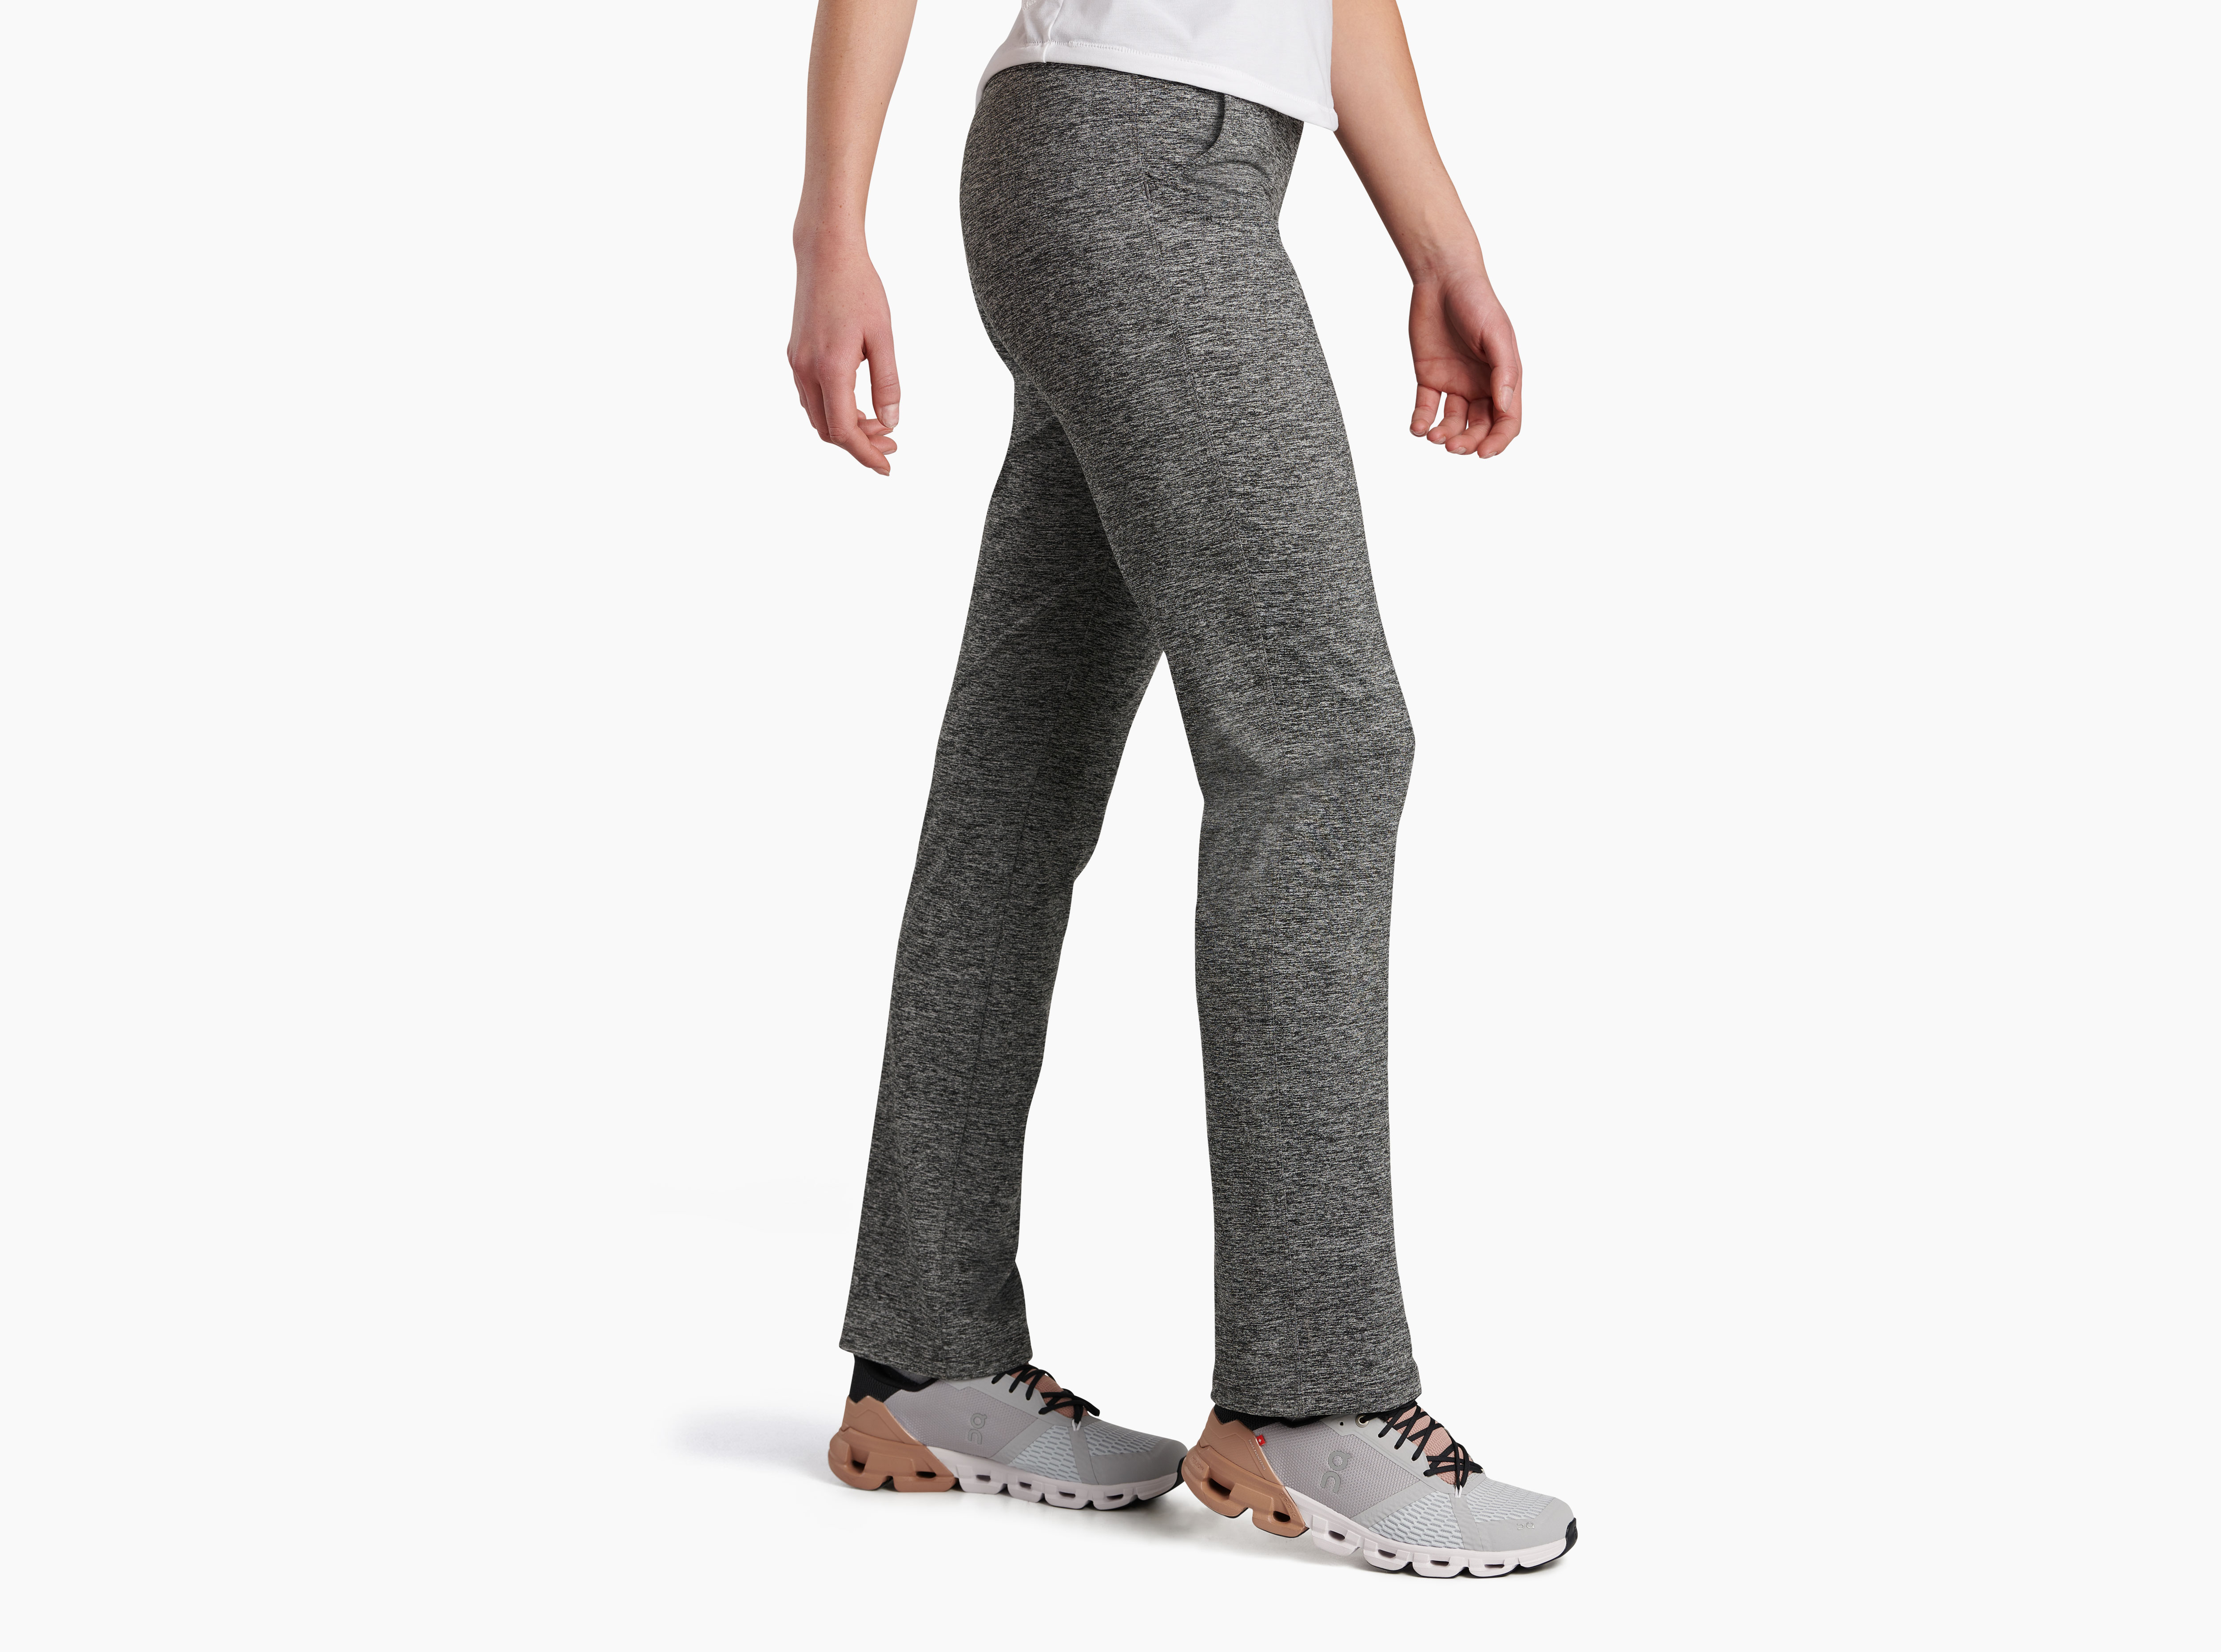 Cable Knit Winter Bliss Pant - Athletic Heather Grey